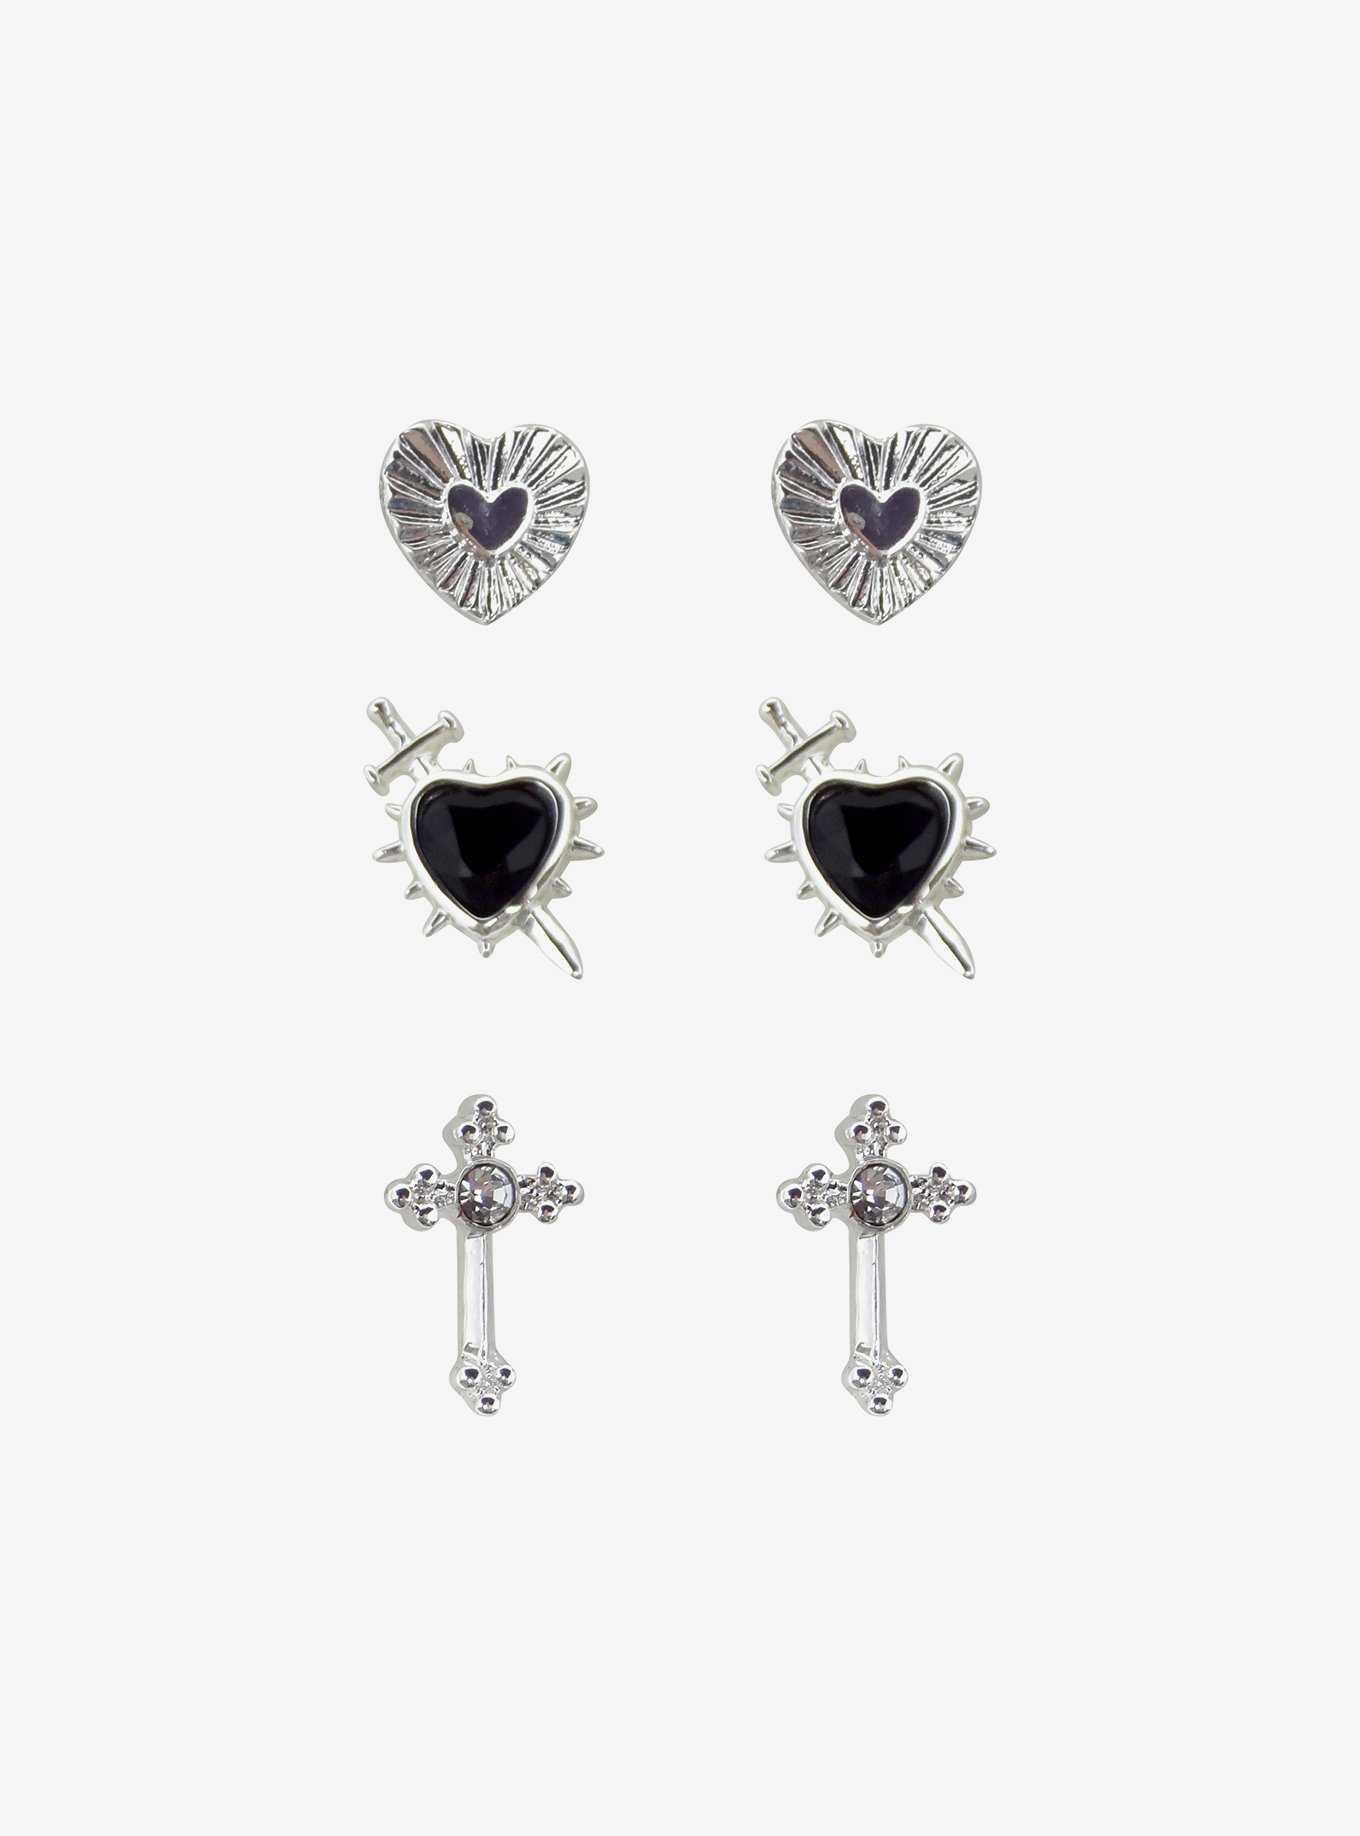 Sterling Silver Plated Heart Cross Earring Set, , hi-res